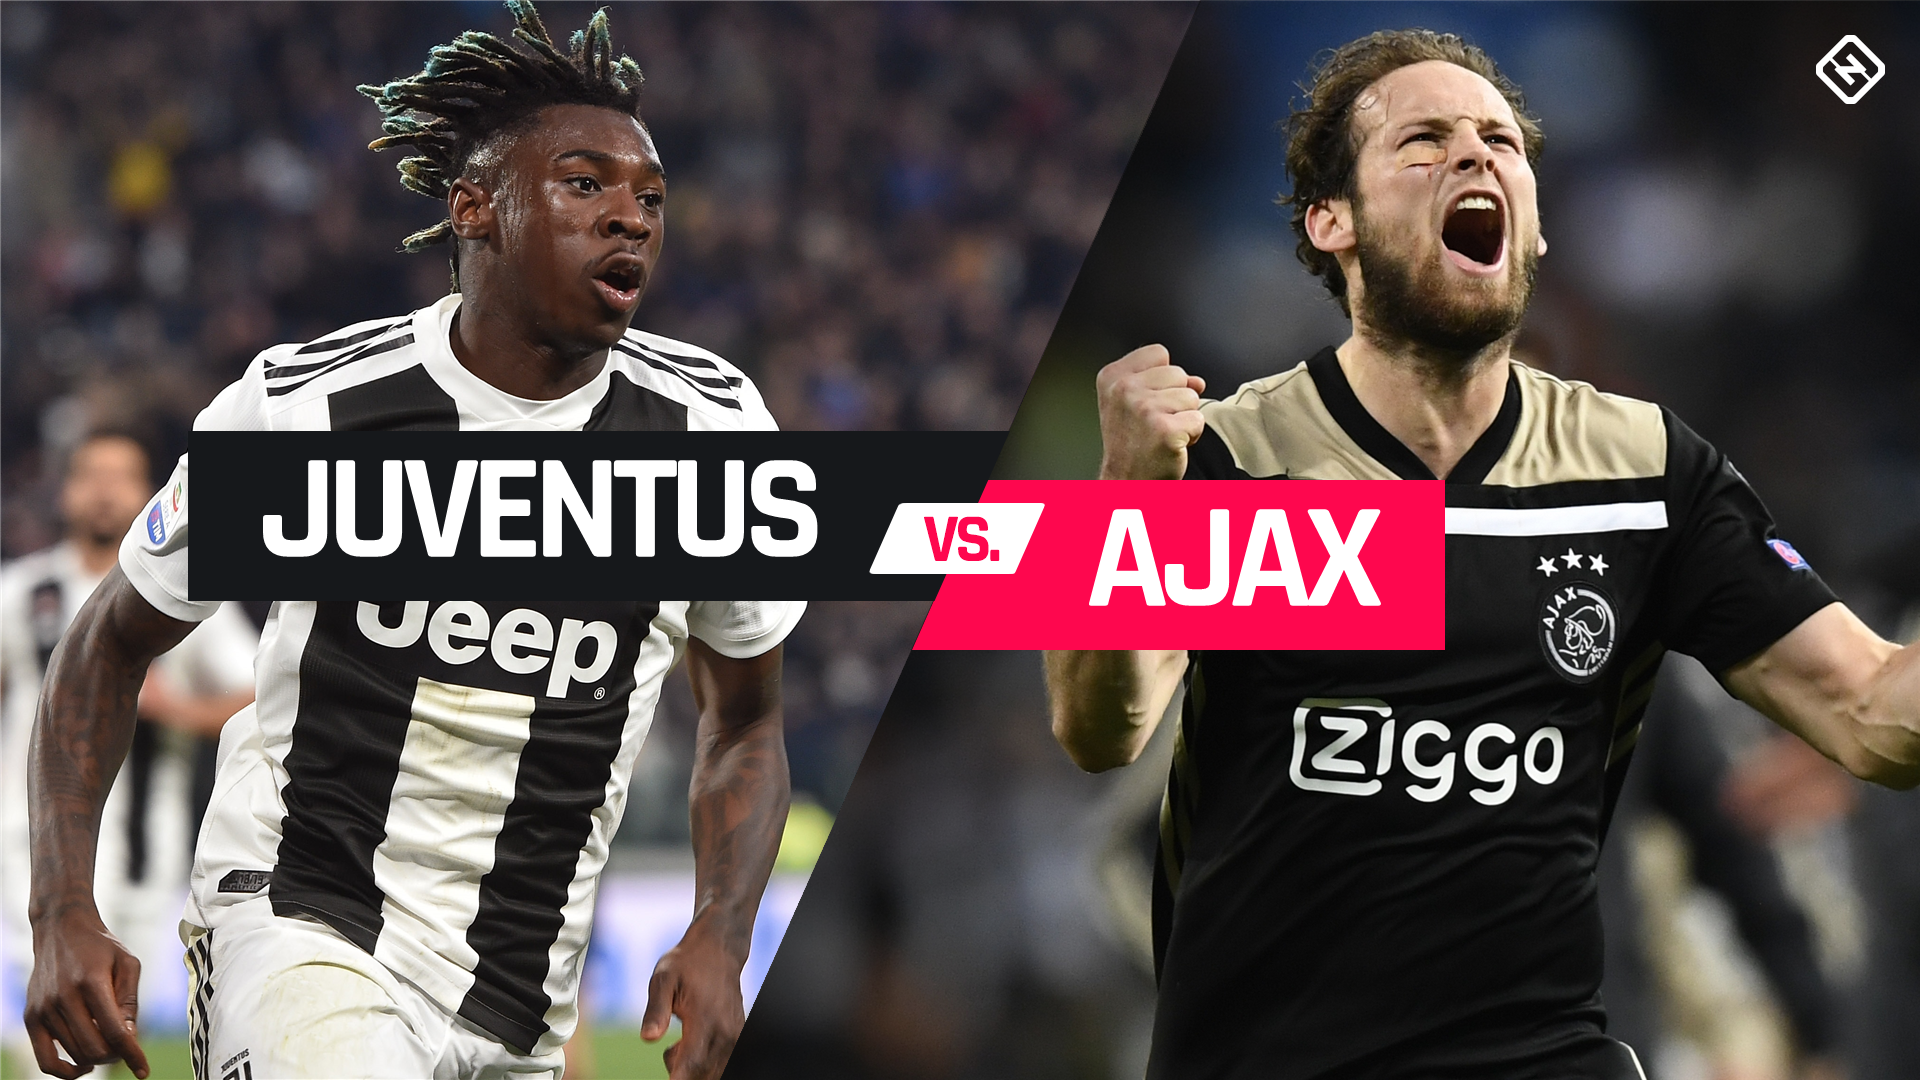 Champions League: How to watch Juventus vs. Ajax live in Canada | Sporting News1920 x 1080